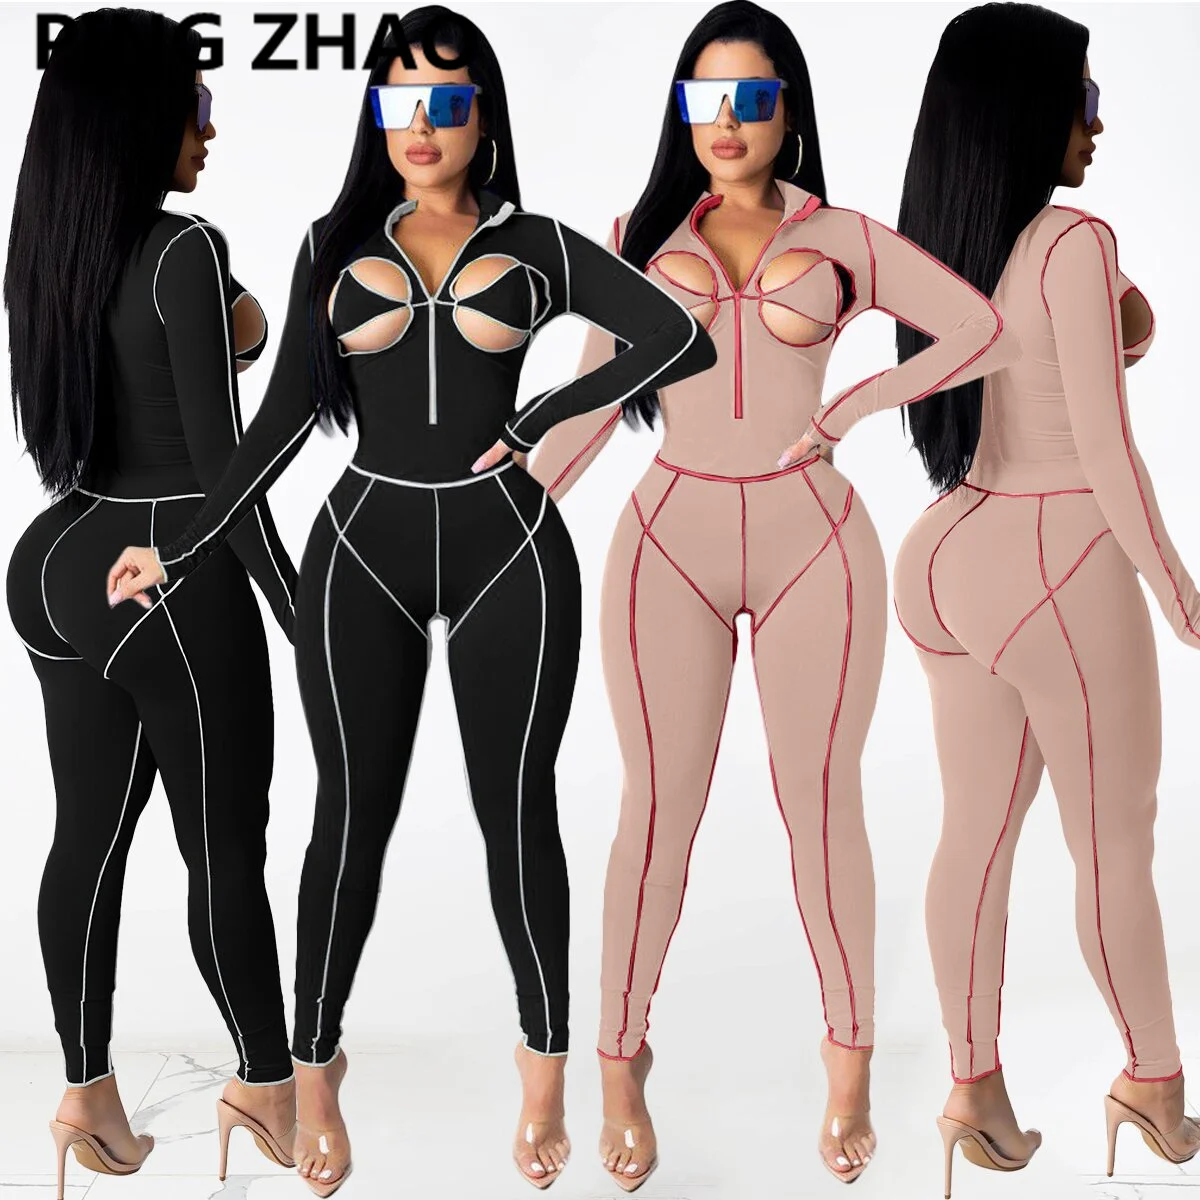 

PING ZHAO Women Cut Out Bra Zipper Bodycon Long Sleeve Jumpsuit Sexy Party One Piece Overall Romper